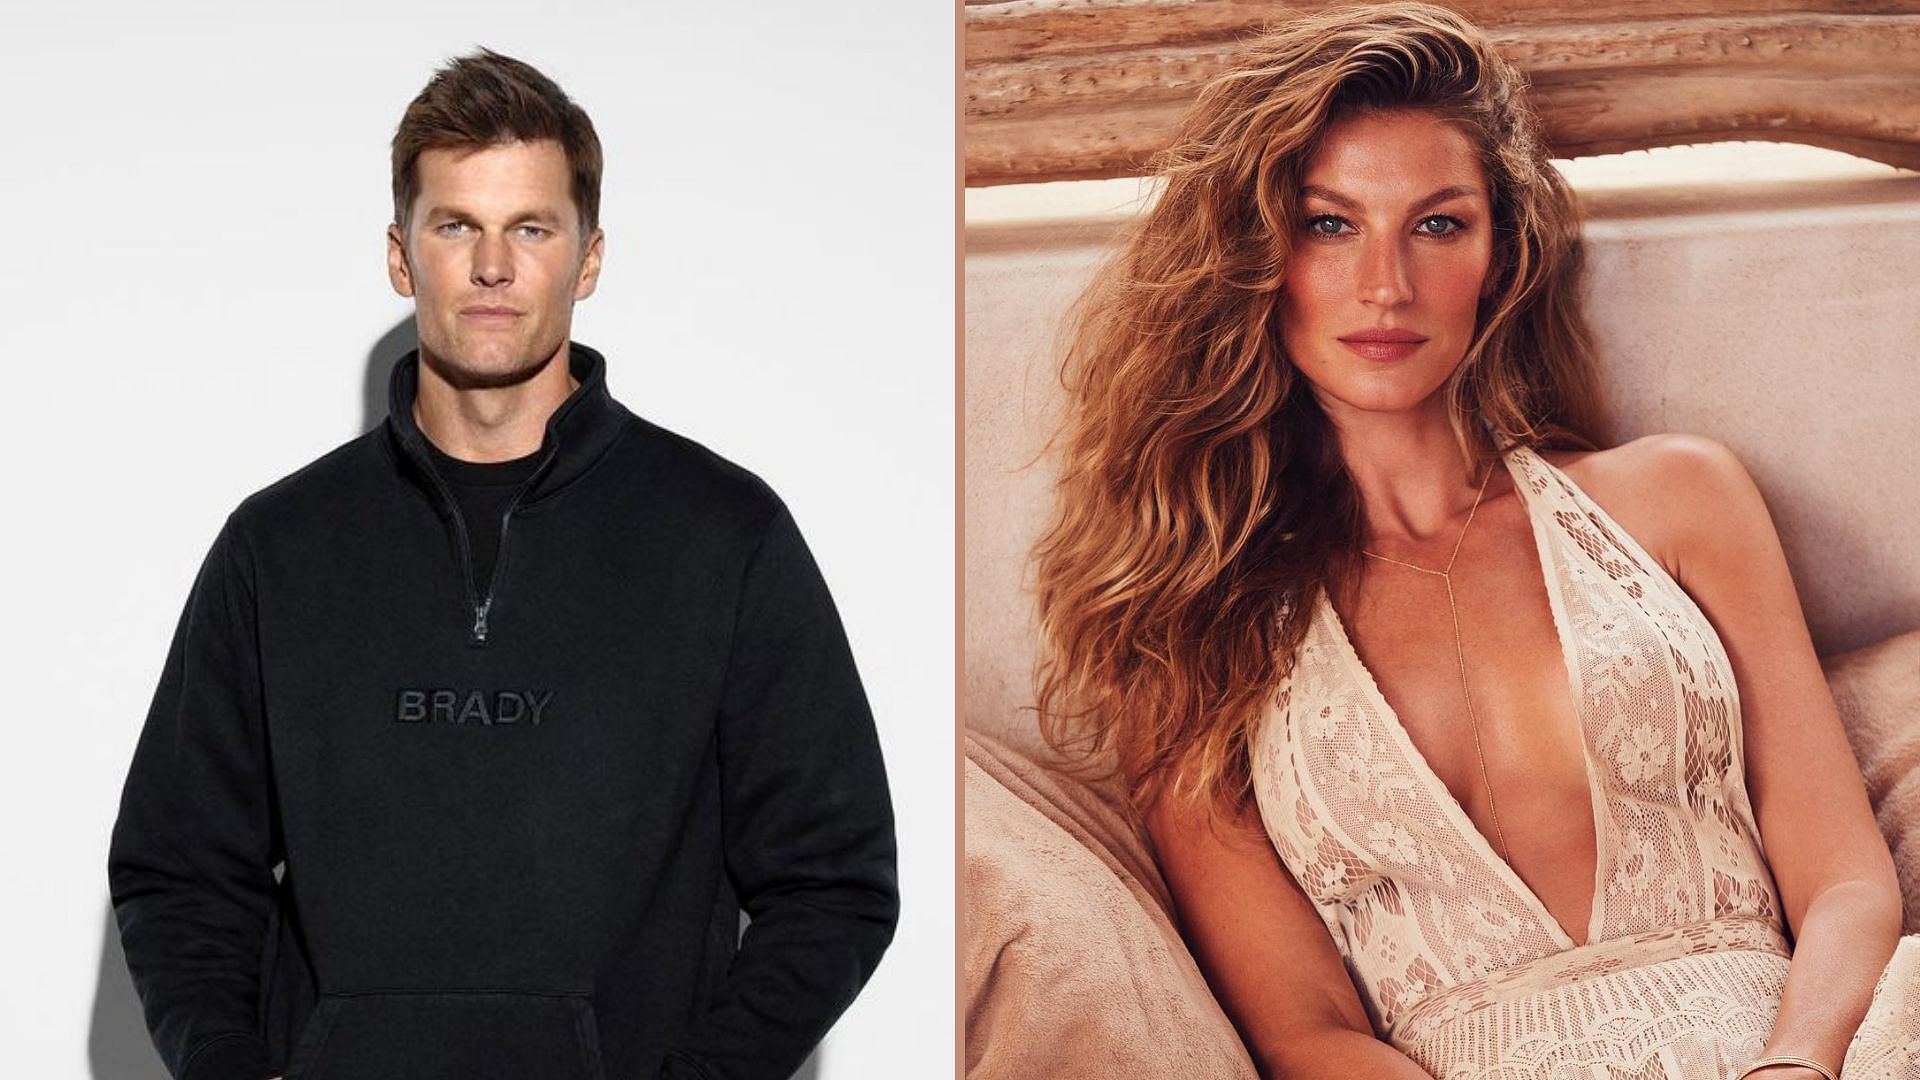 FTX spent $1,000,000,000 on endorsements from Tom Brady, Gisele Bundchen and more celebs: Report 